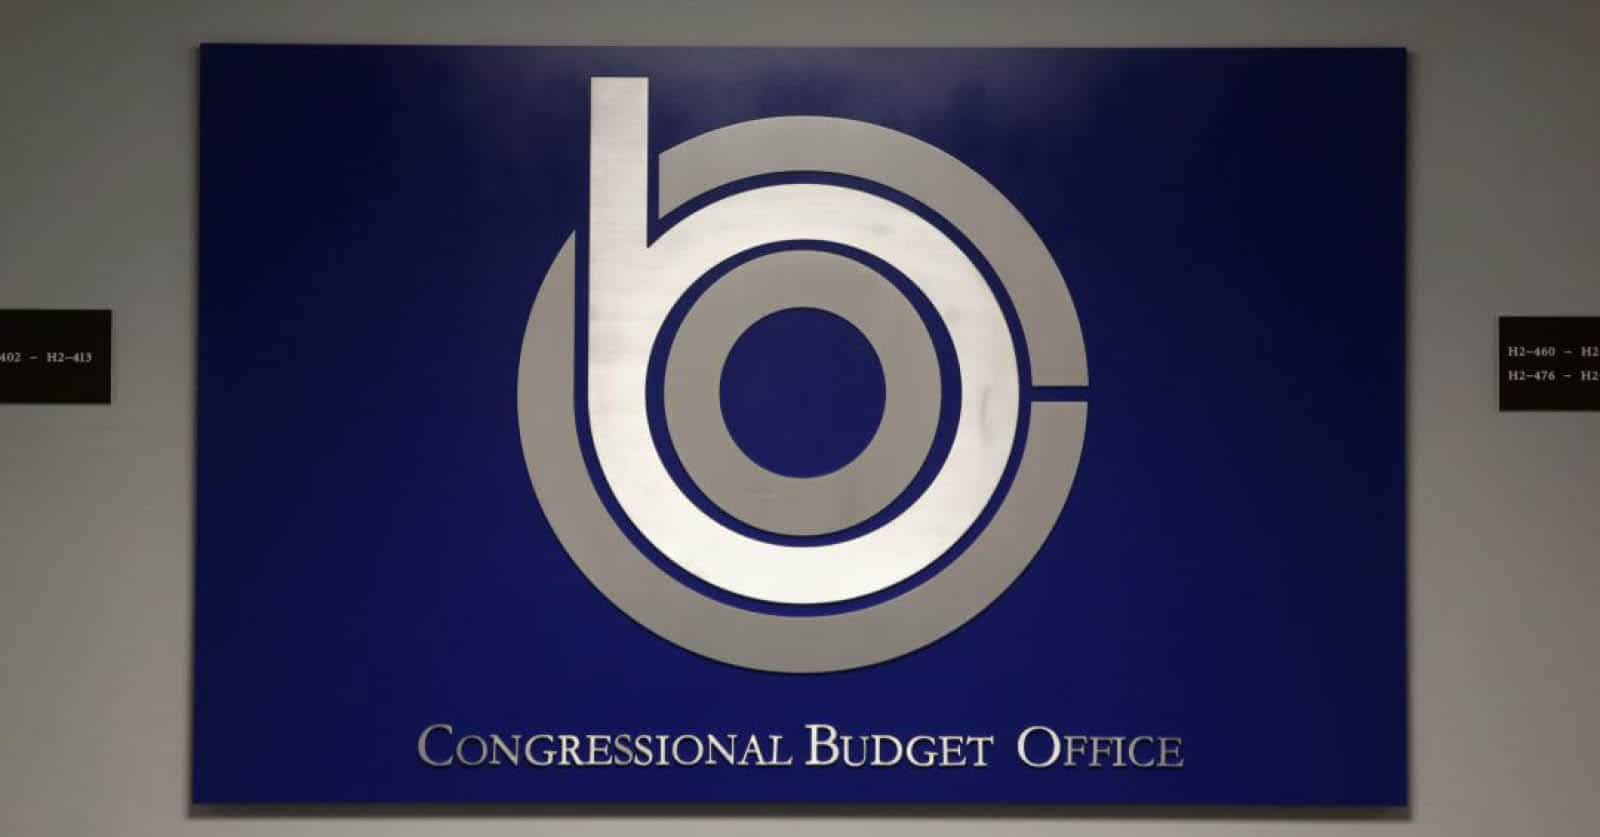 Coalition Gives CBO Recommendations on How to Improve Transparency